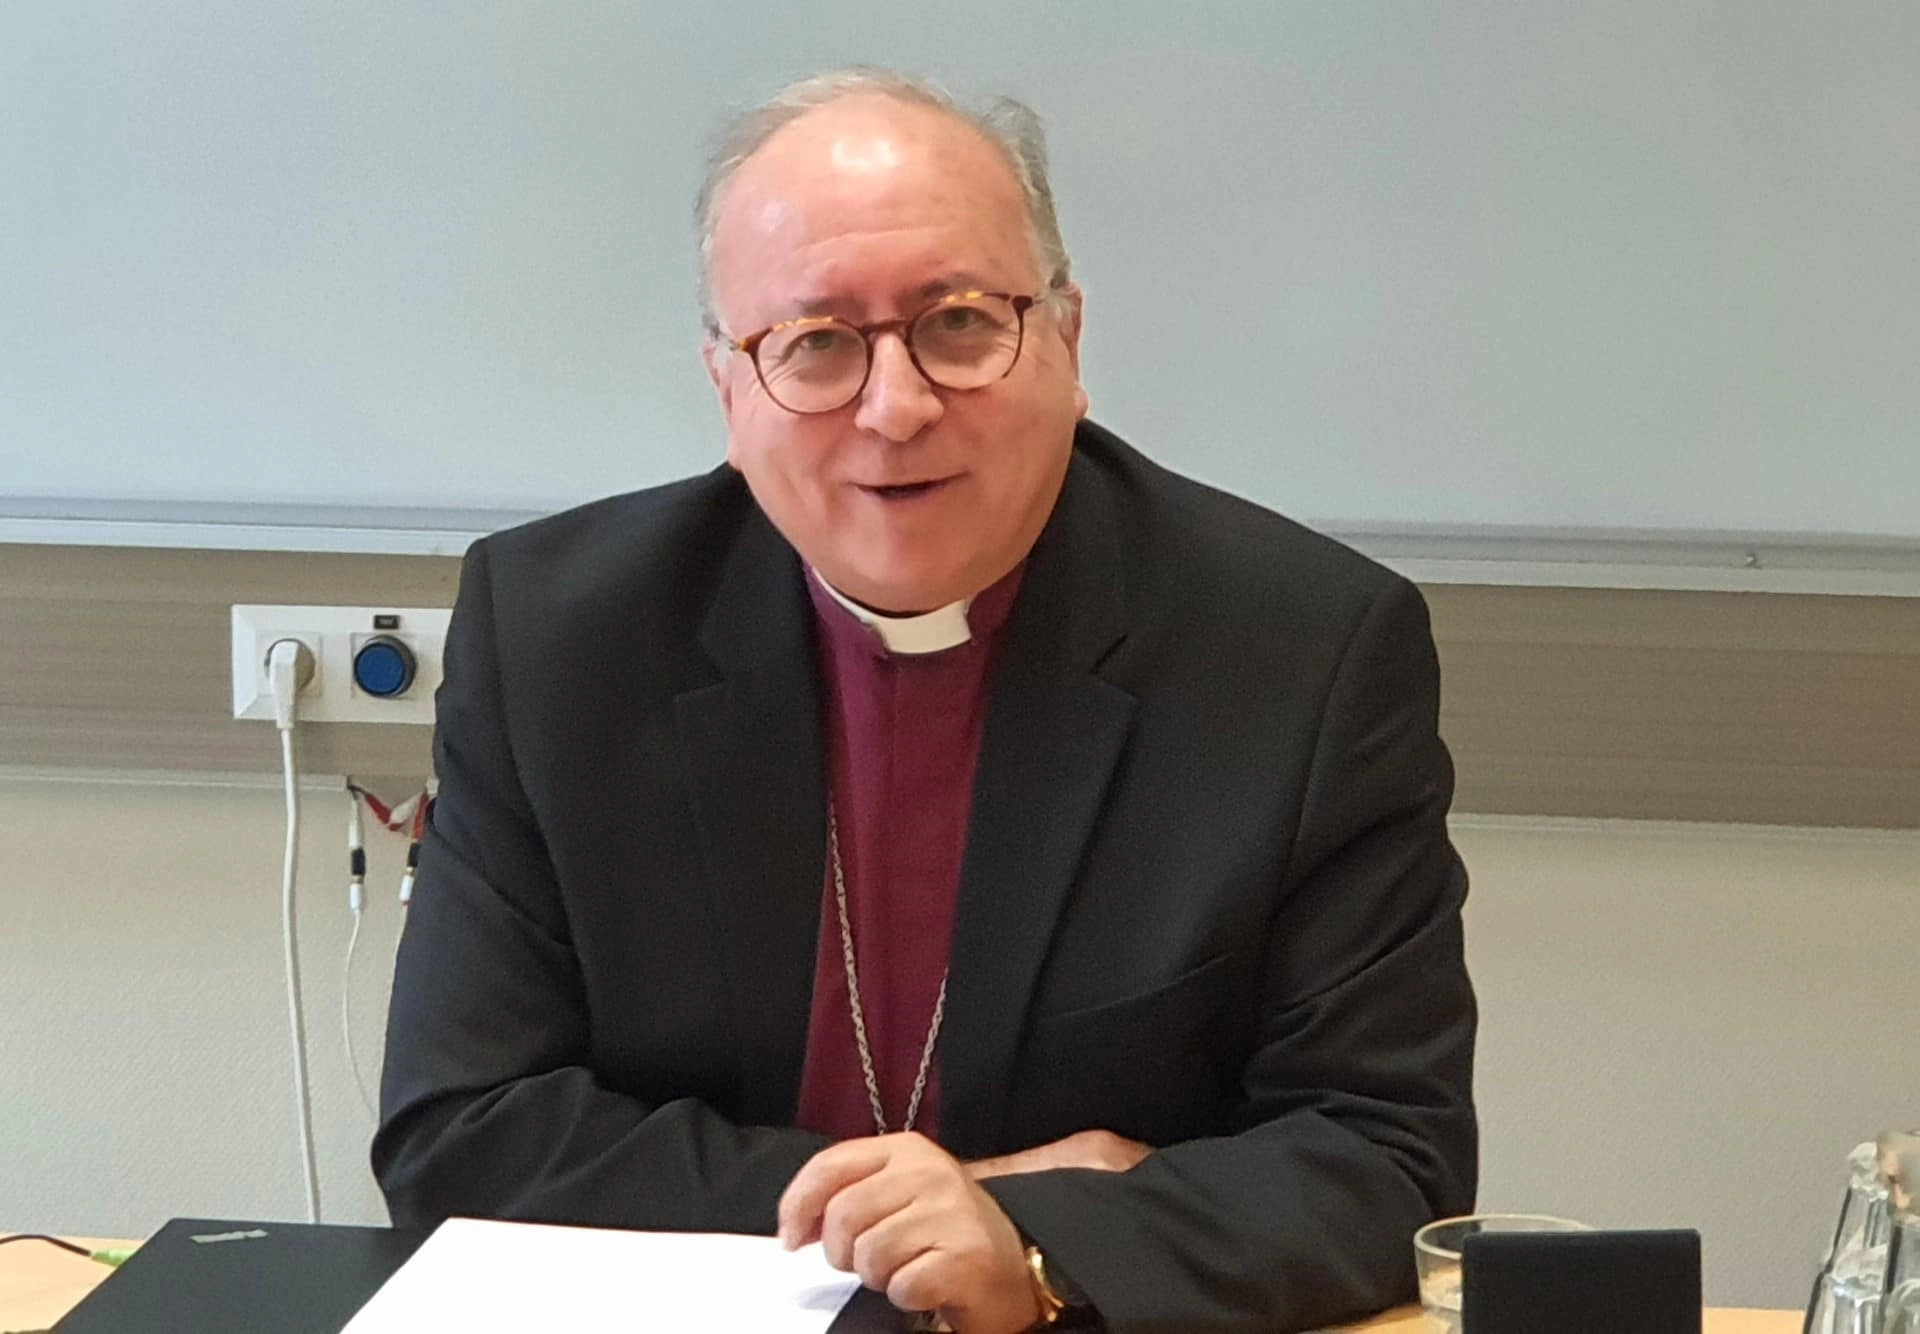 Bishop David Hamid, suffragan bishop of Europe in the Church of England, at the 10th meeting of the Malines Conversations Group, held in the Sofia Centre, Helsinki